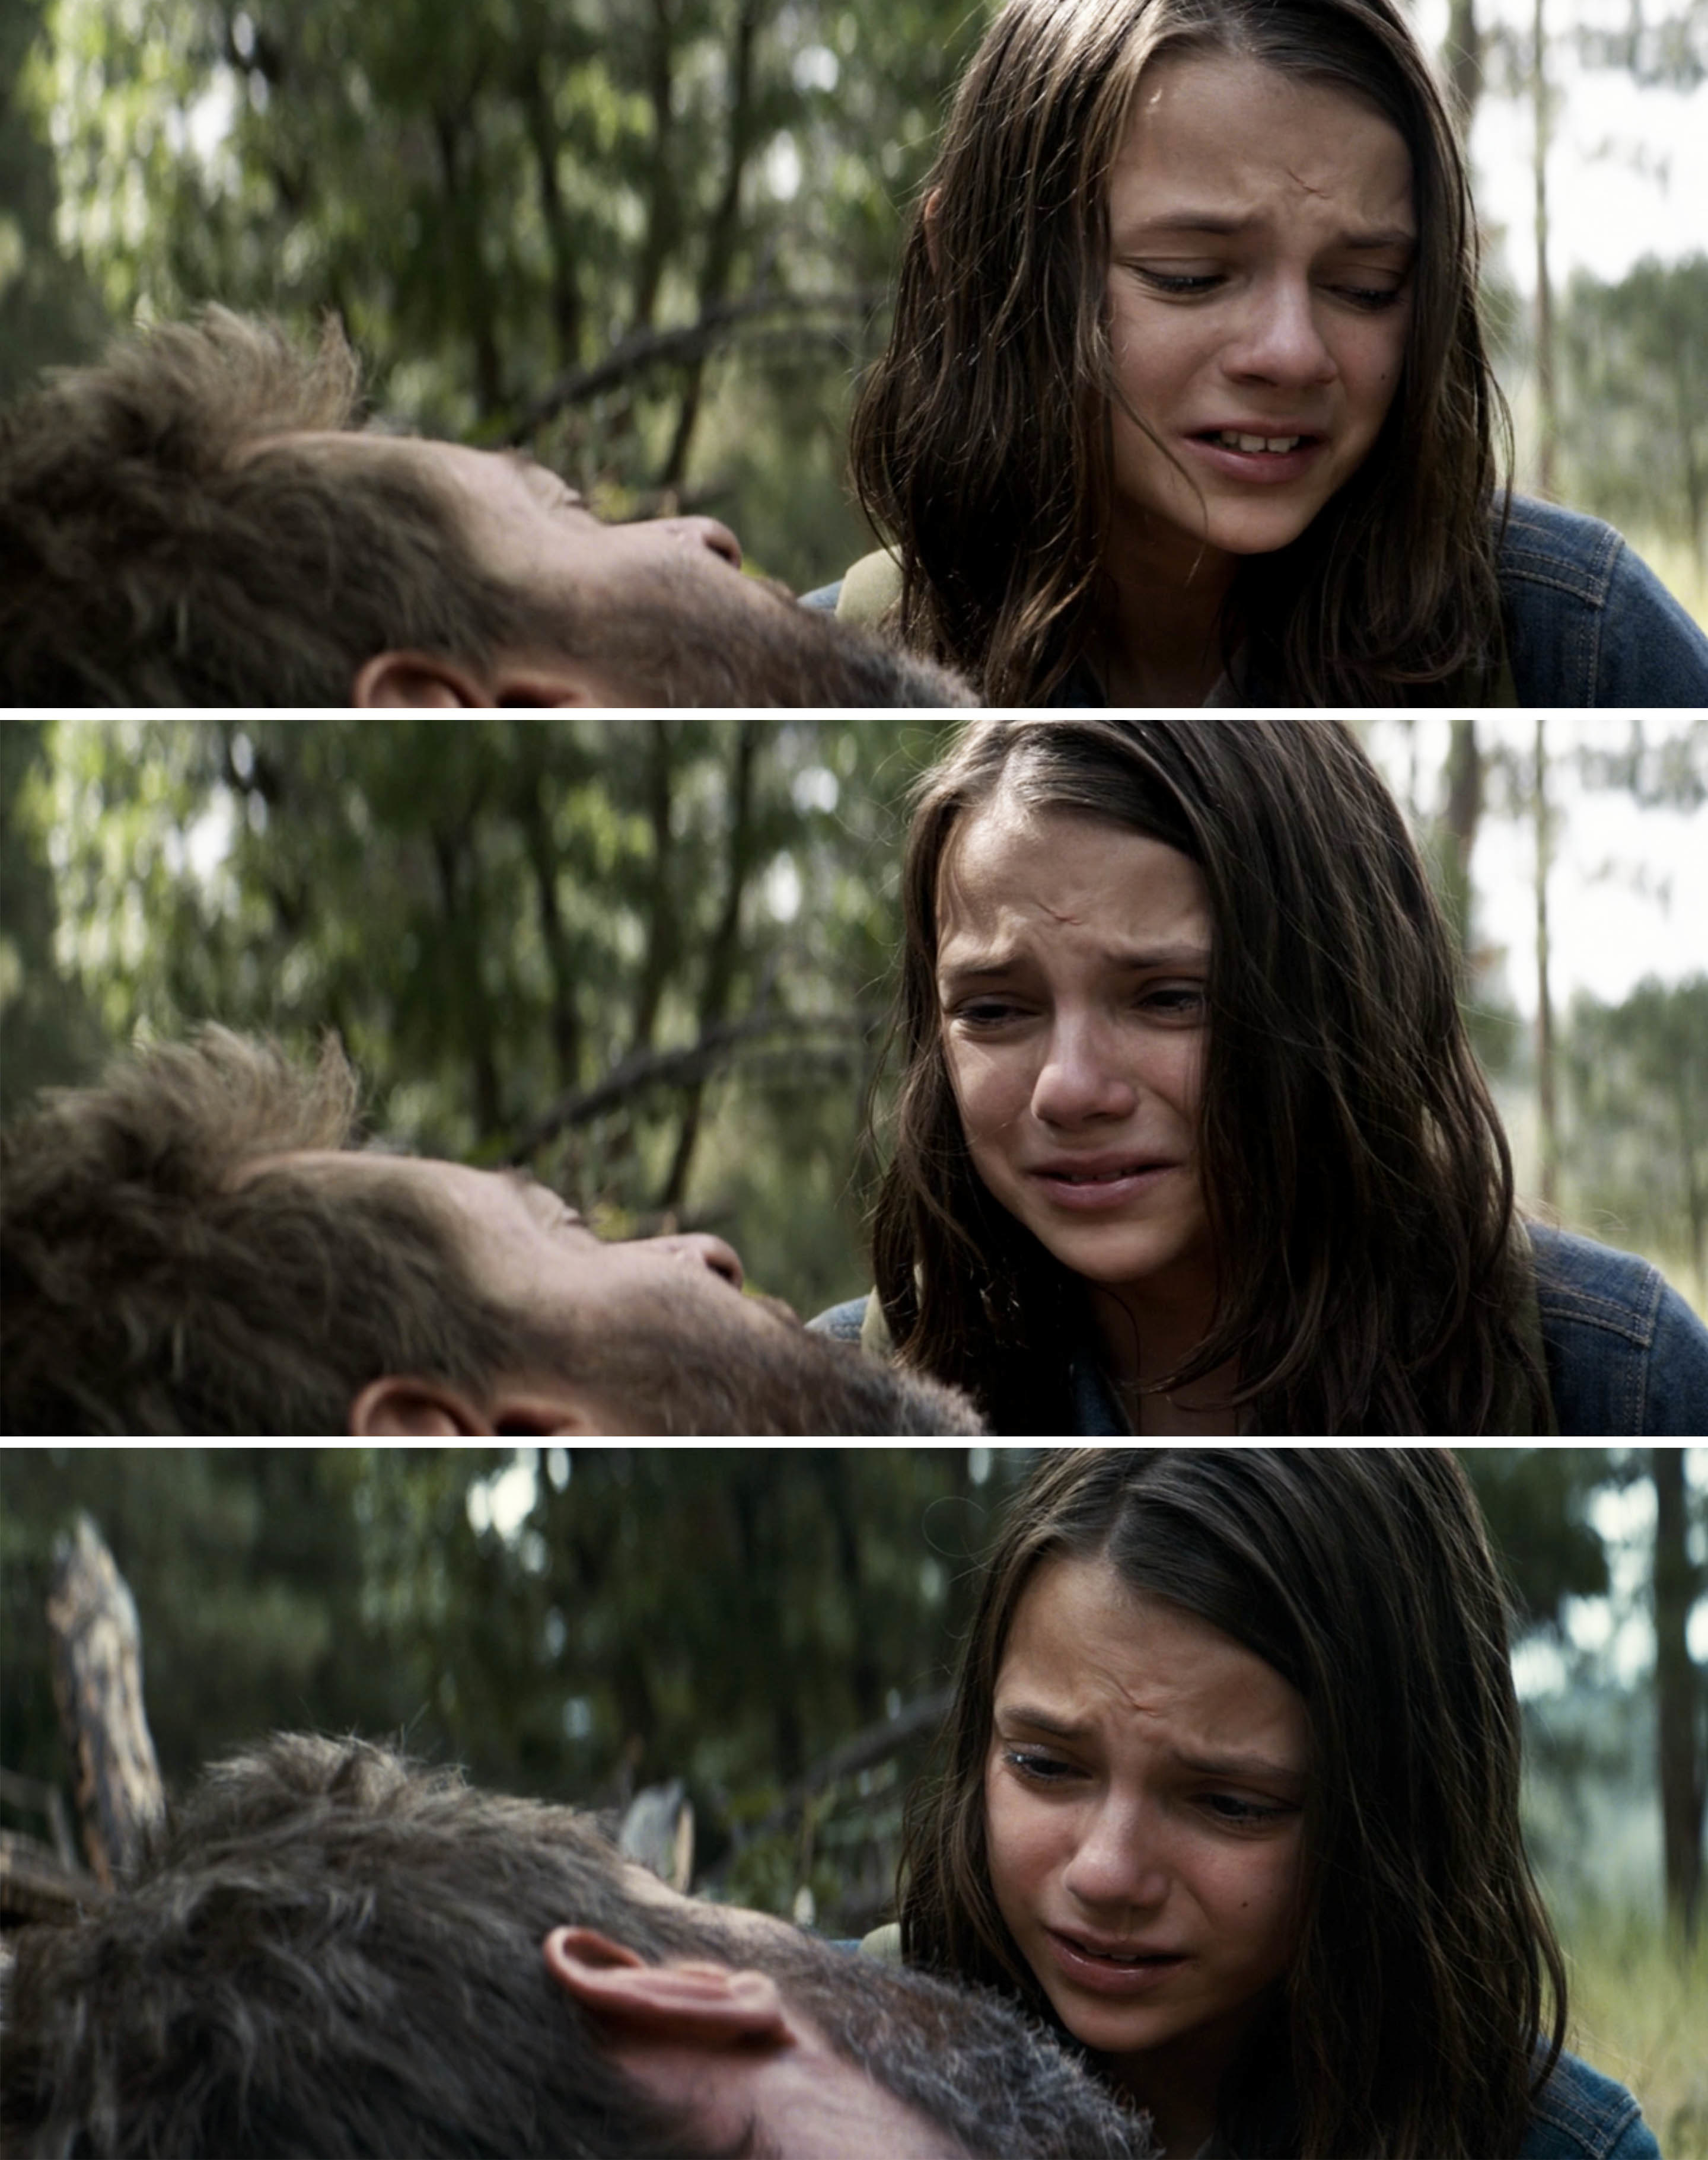 Laura/X-23 in the forest crying and grieving